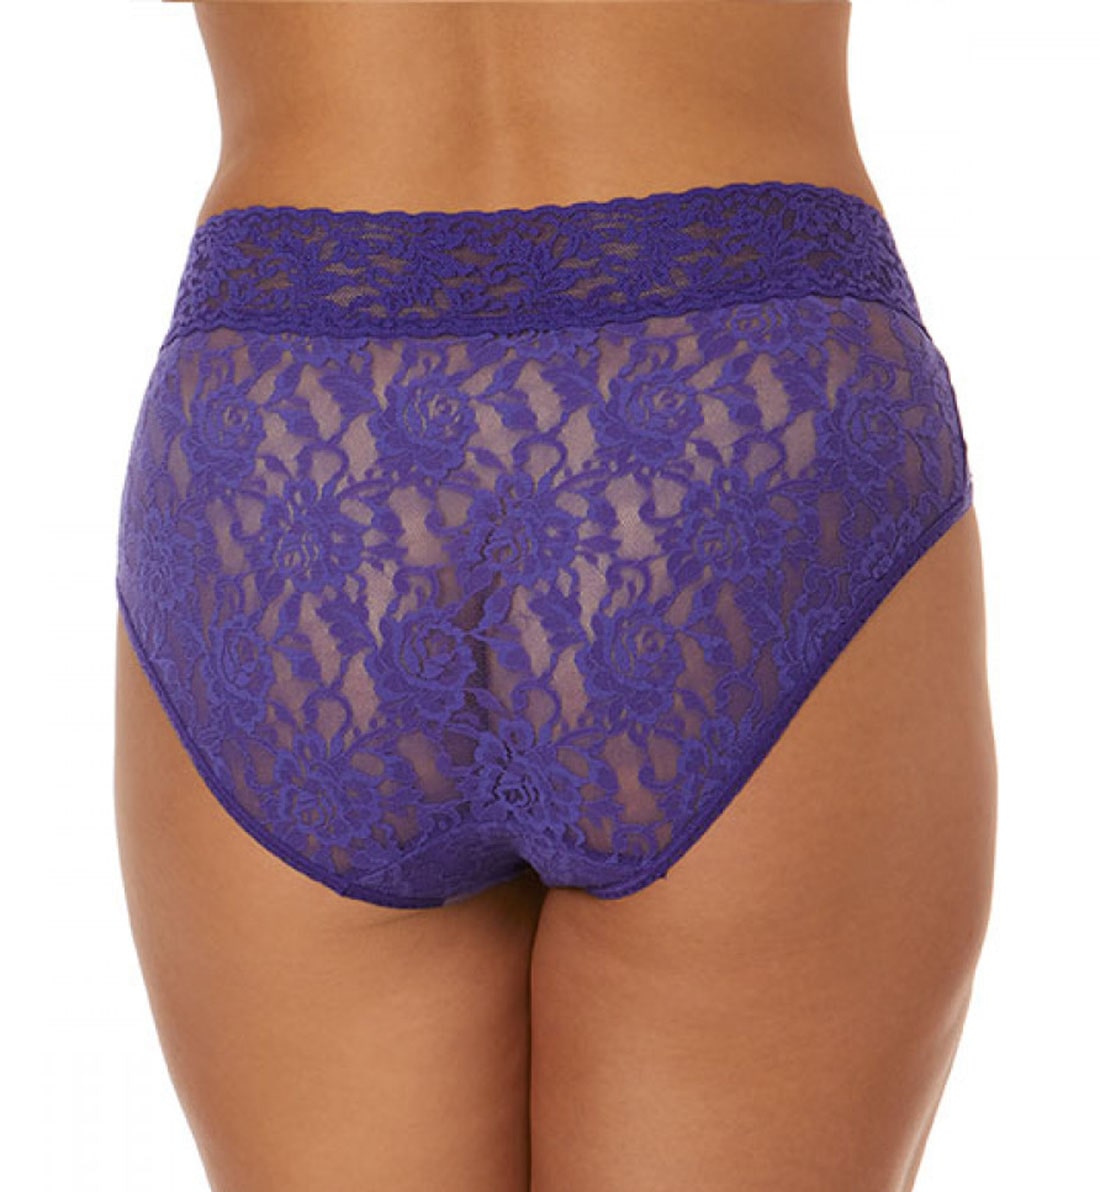 Hanky Panky Signature Lace French Brief (461),XS,Wild Violet - Wild Violet,XS